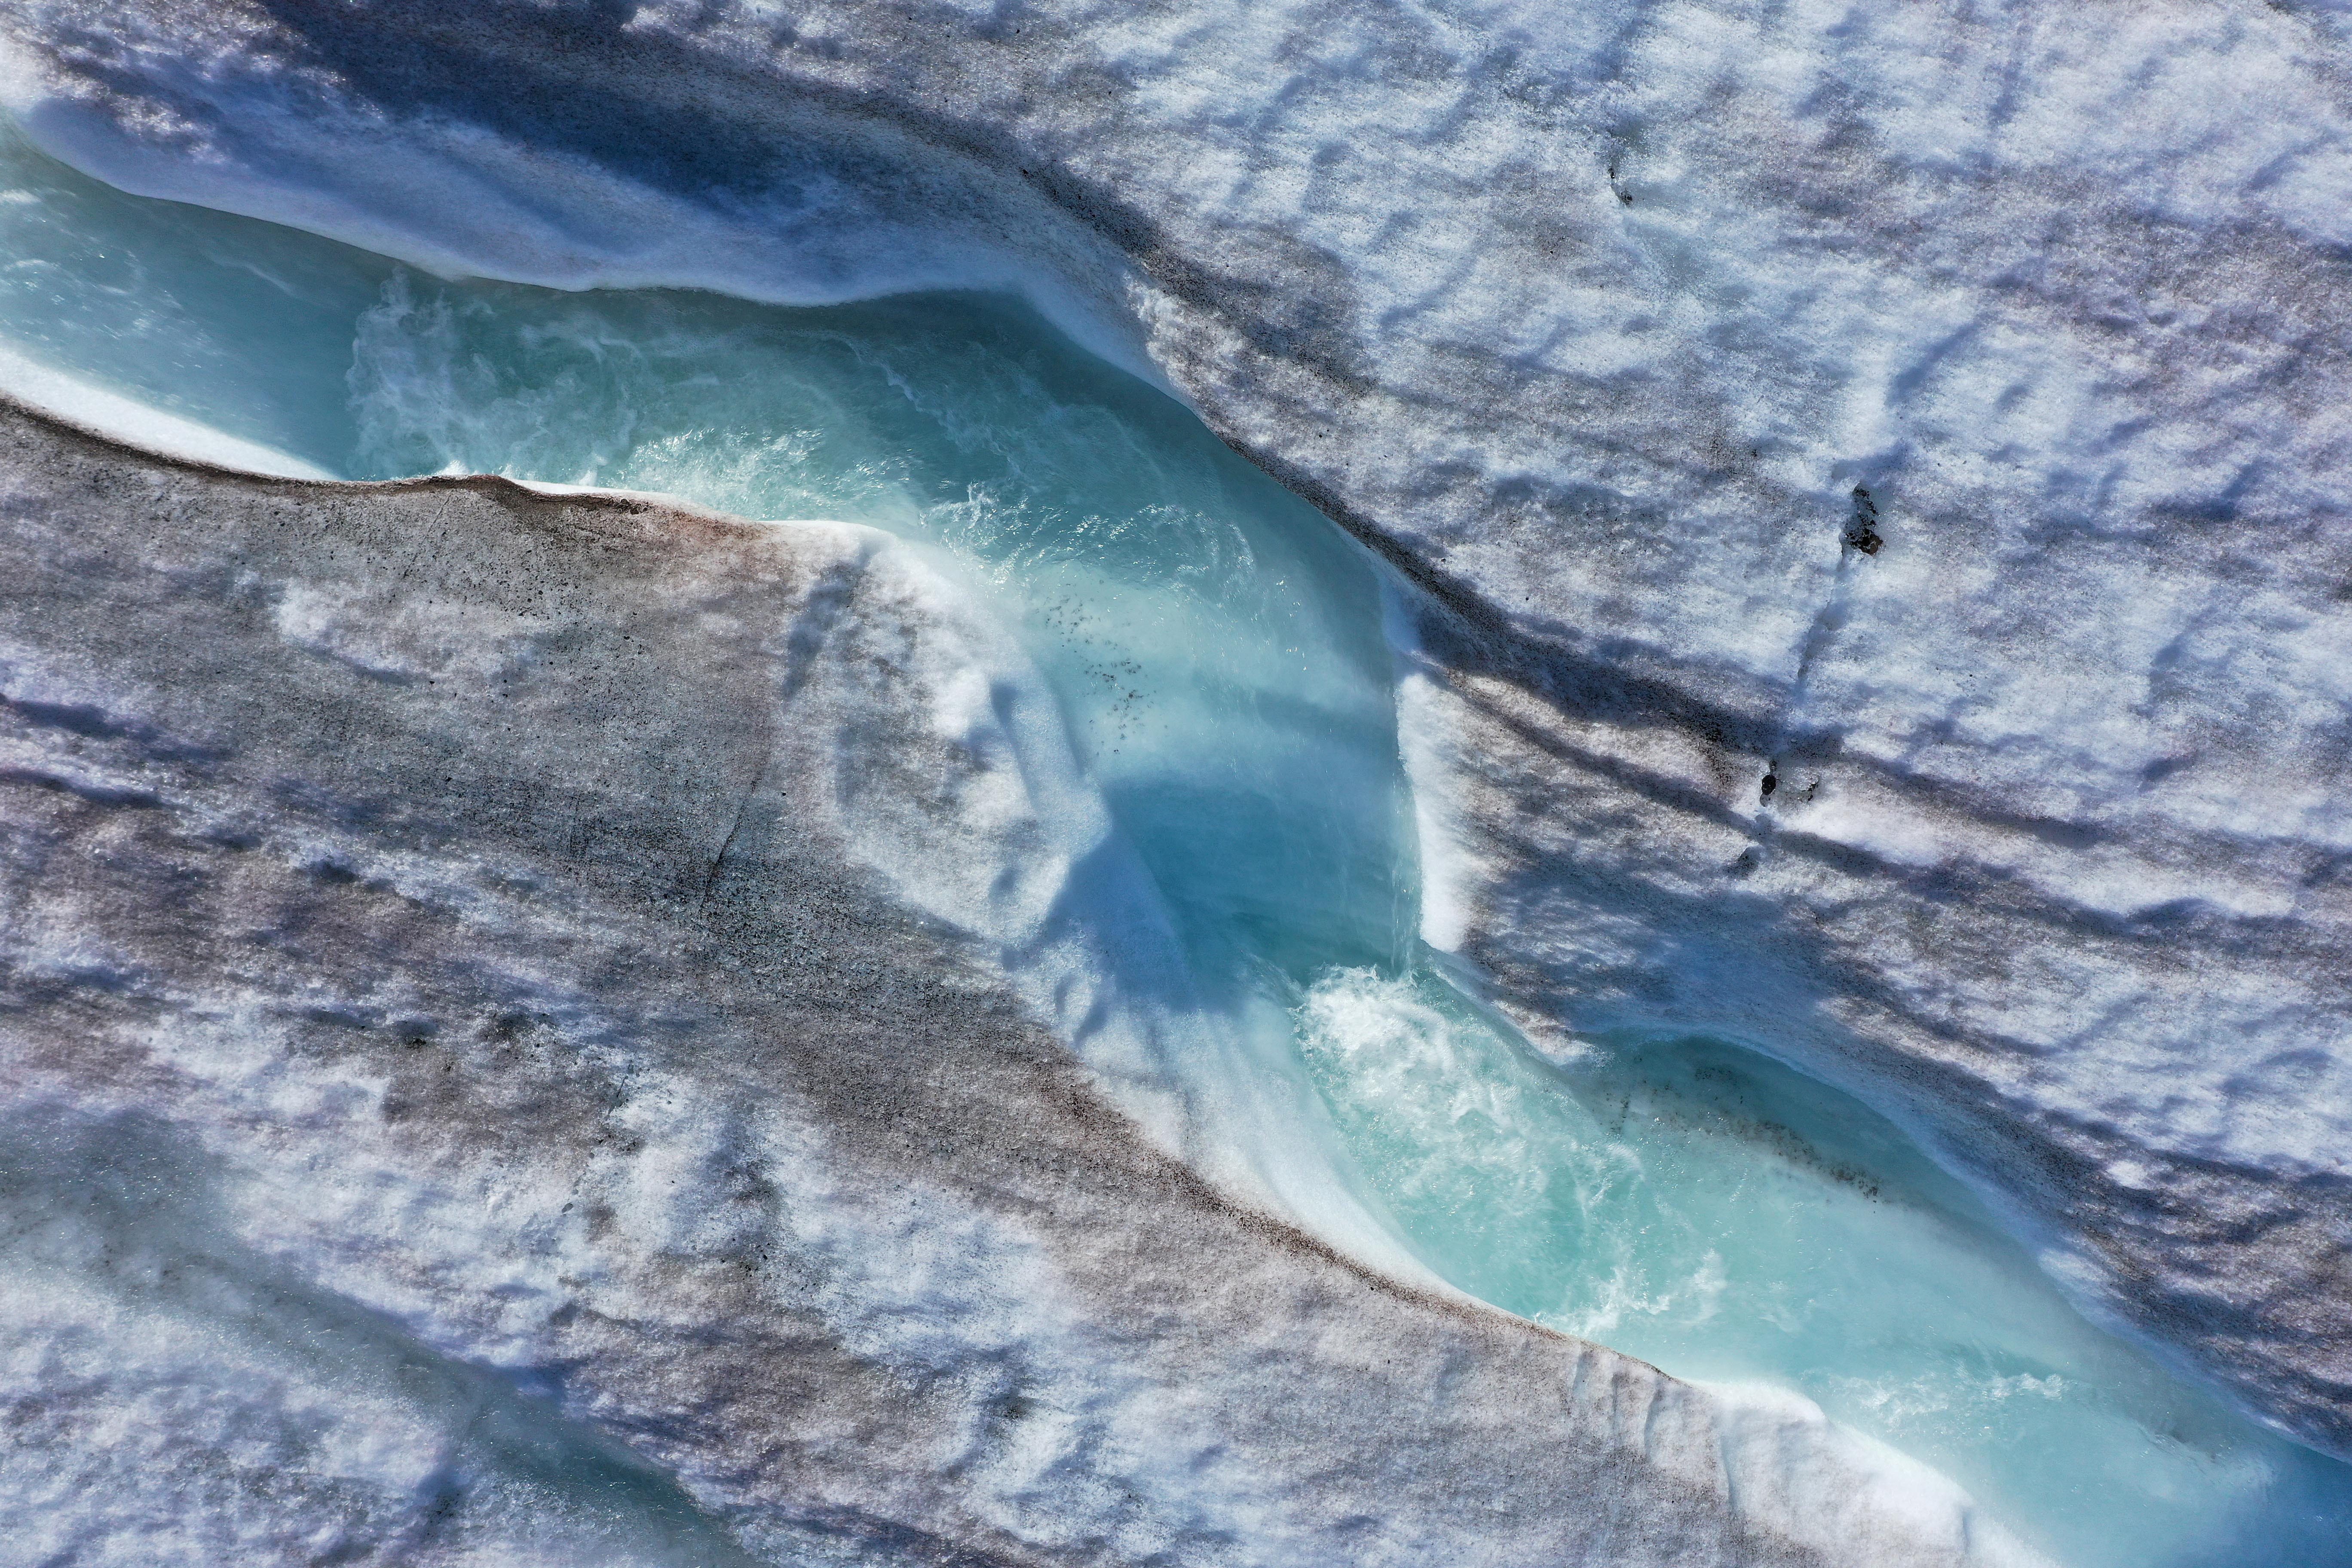 Water carves a winding channel down the surface of the melting Longyearbreen glacier during a summer heat wave on Svalbard archipelago